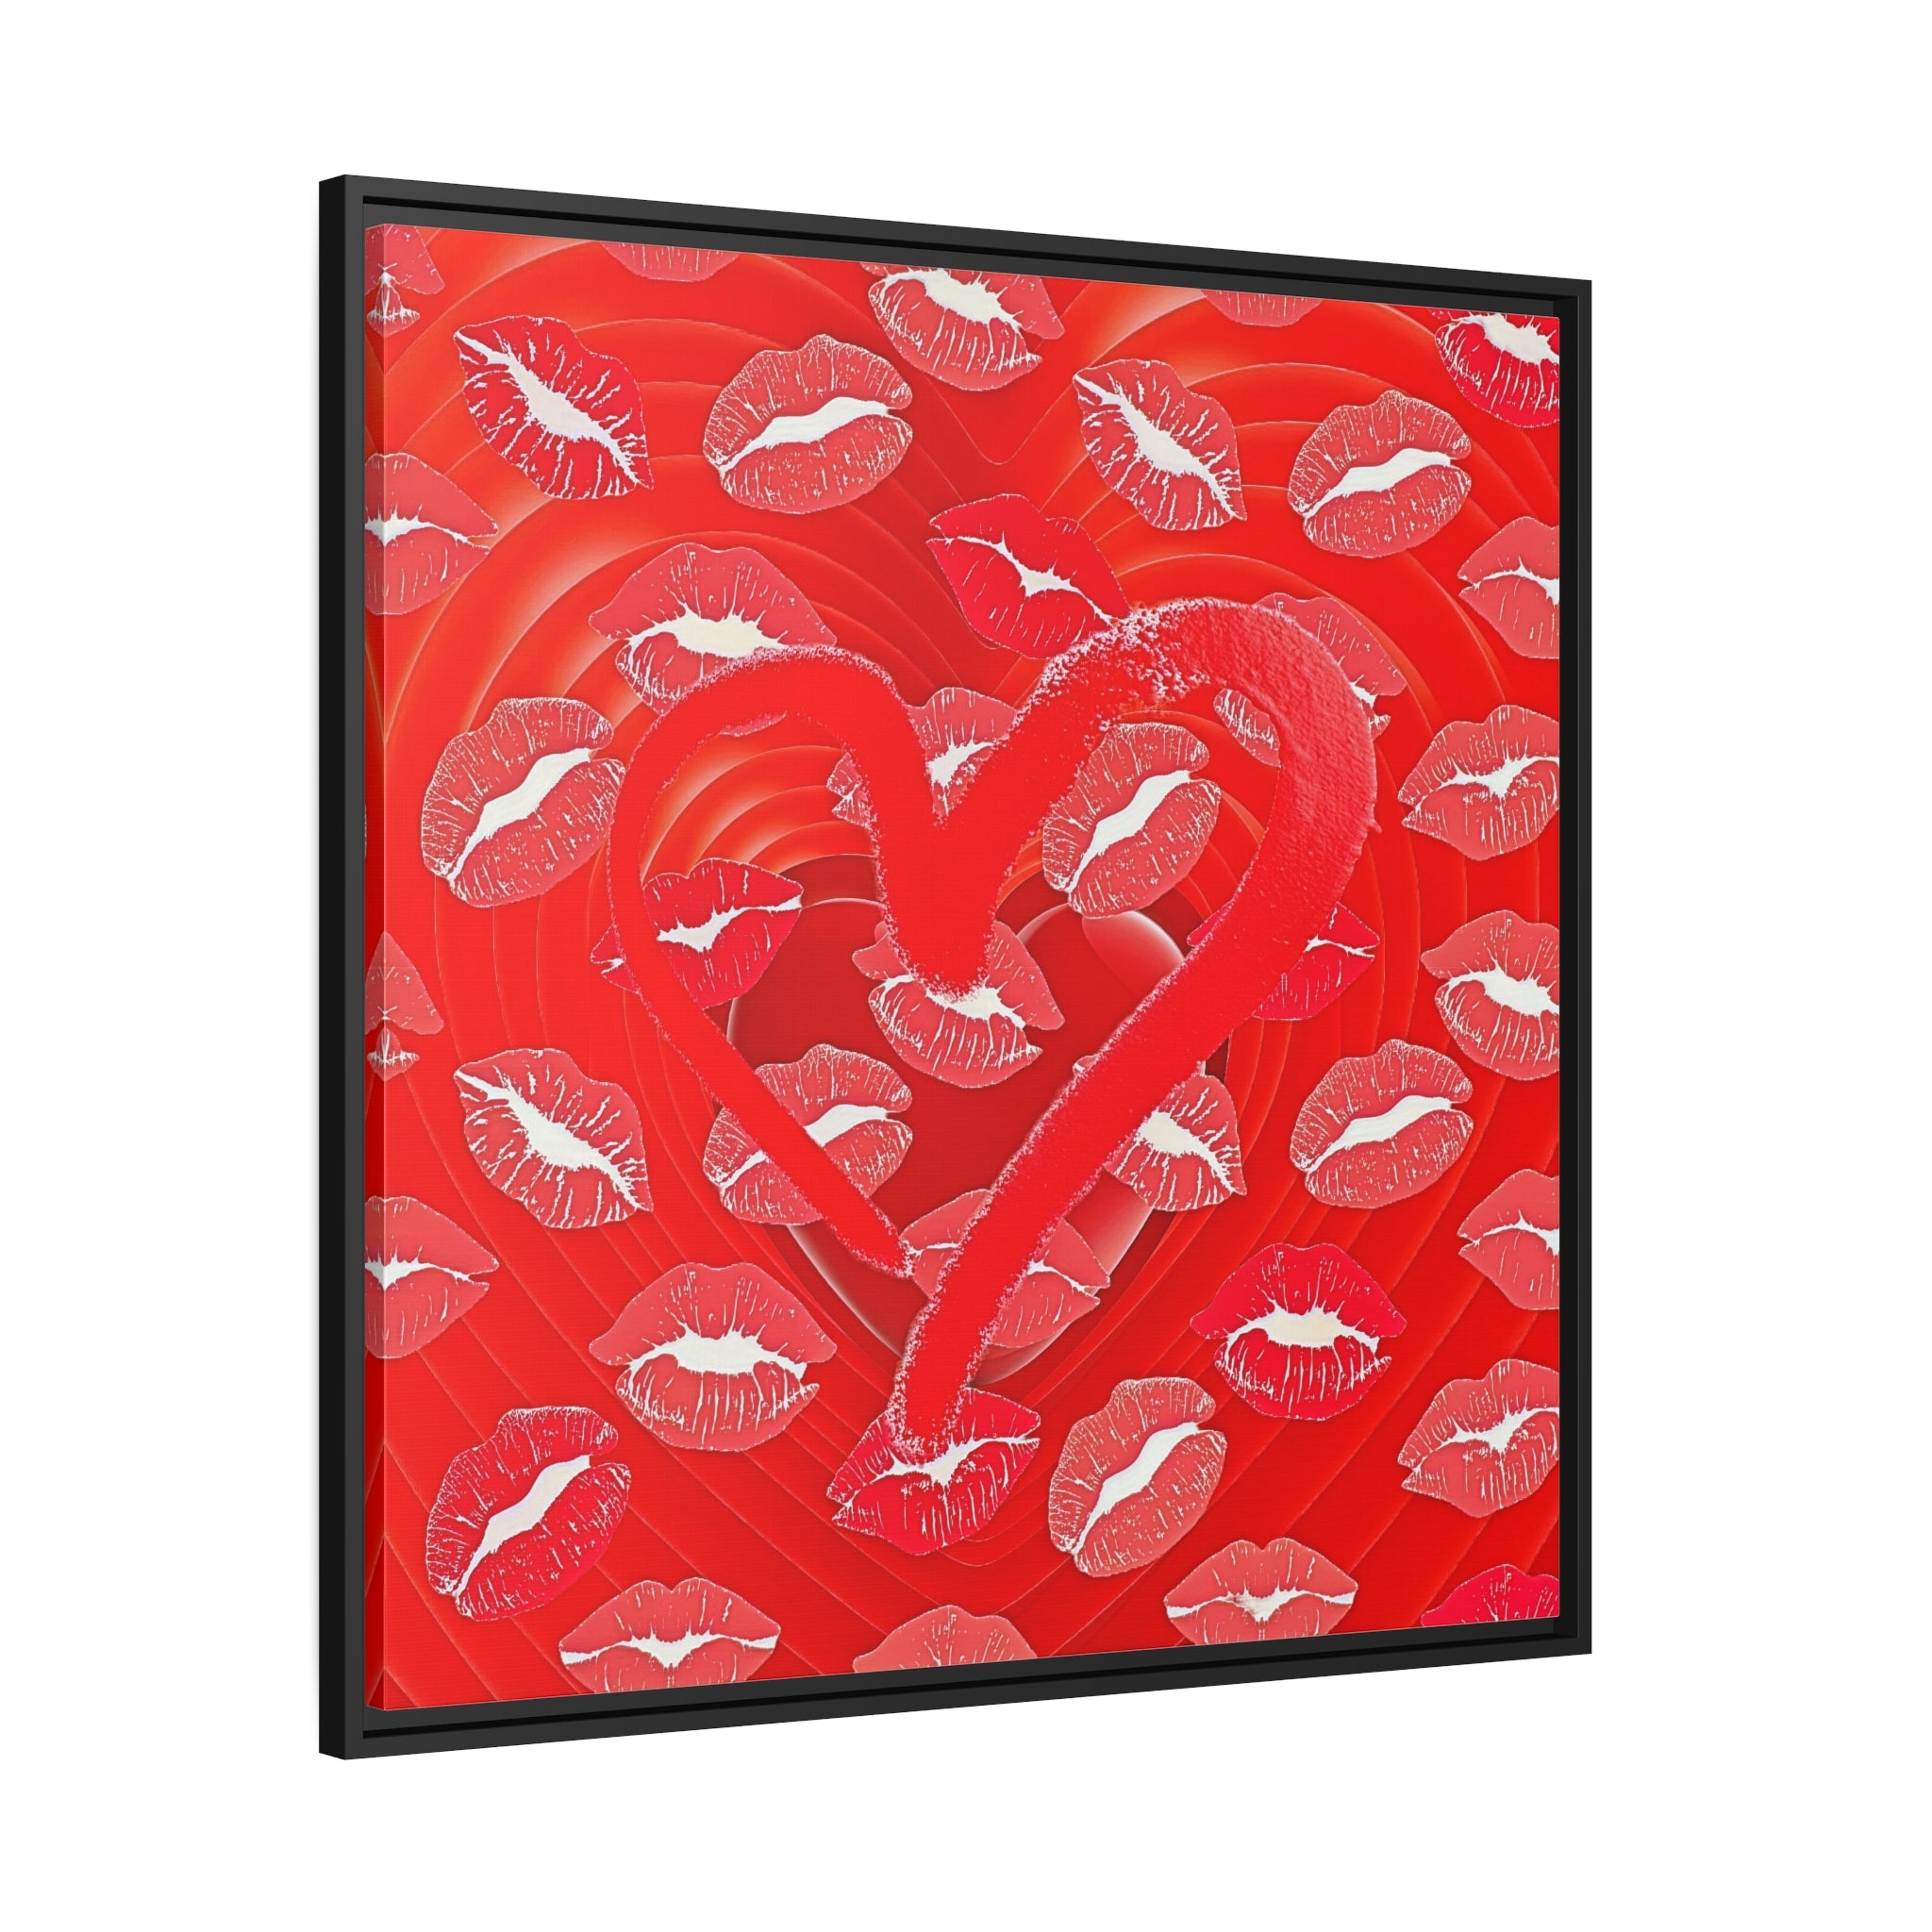 Wall Art LOVE LOTS of KISSES Canvas Print Painting Original Giclee 32X32 + Frame Love Nice Beauty Fun Design Fit House Home Office Gift Ready Hang Rooms